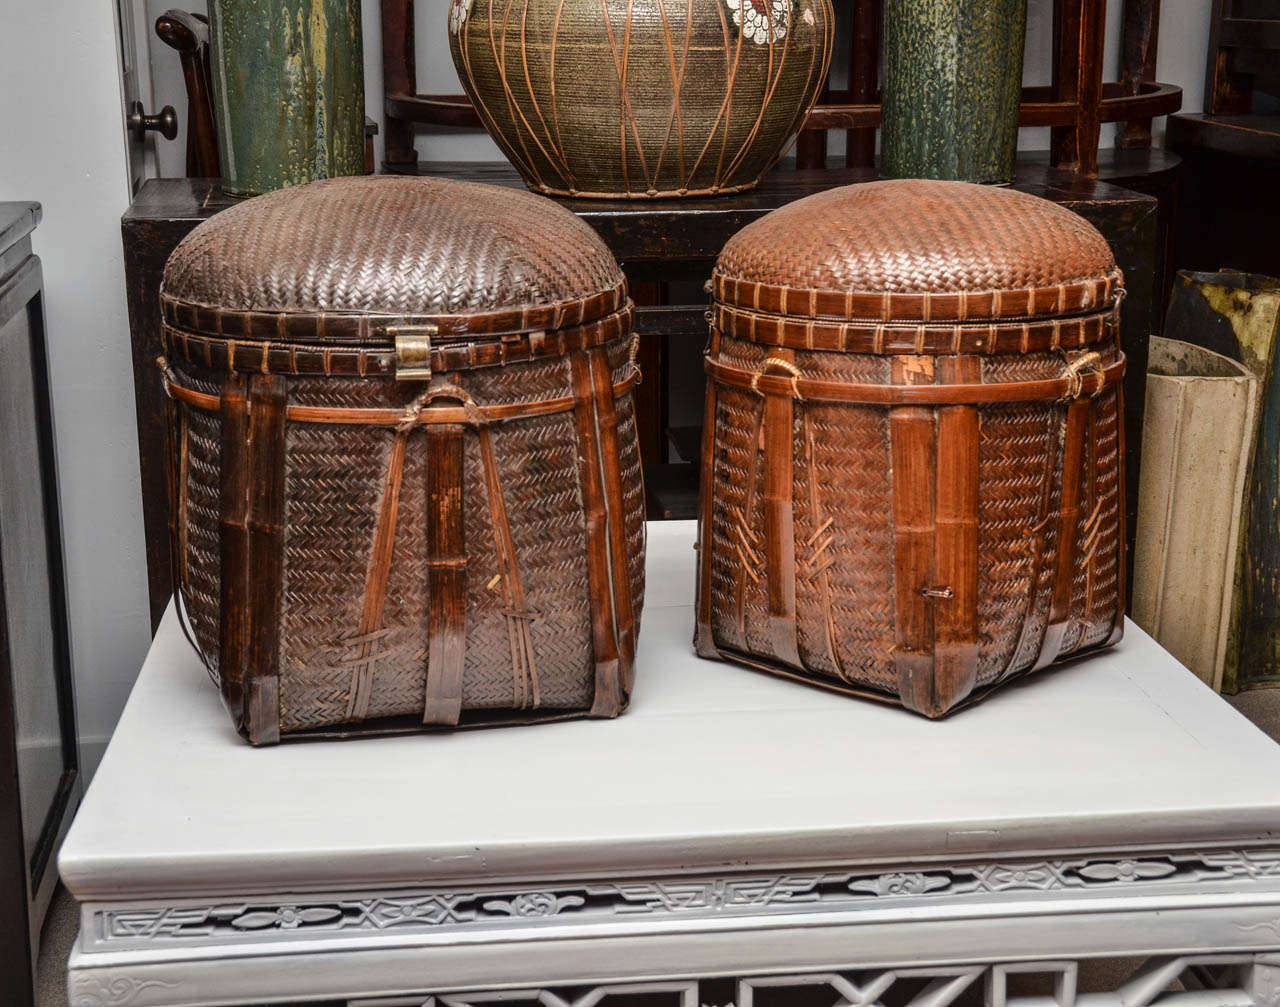 Turn of the century, Q'ing Dynasty Rice Storage Baskets ( 1 available )